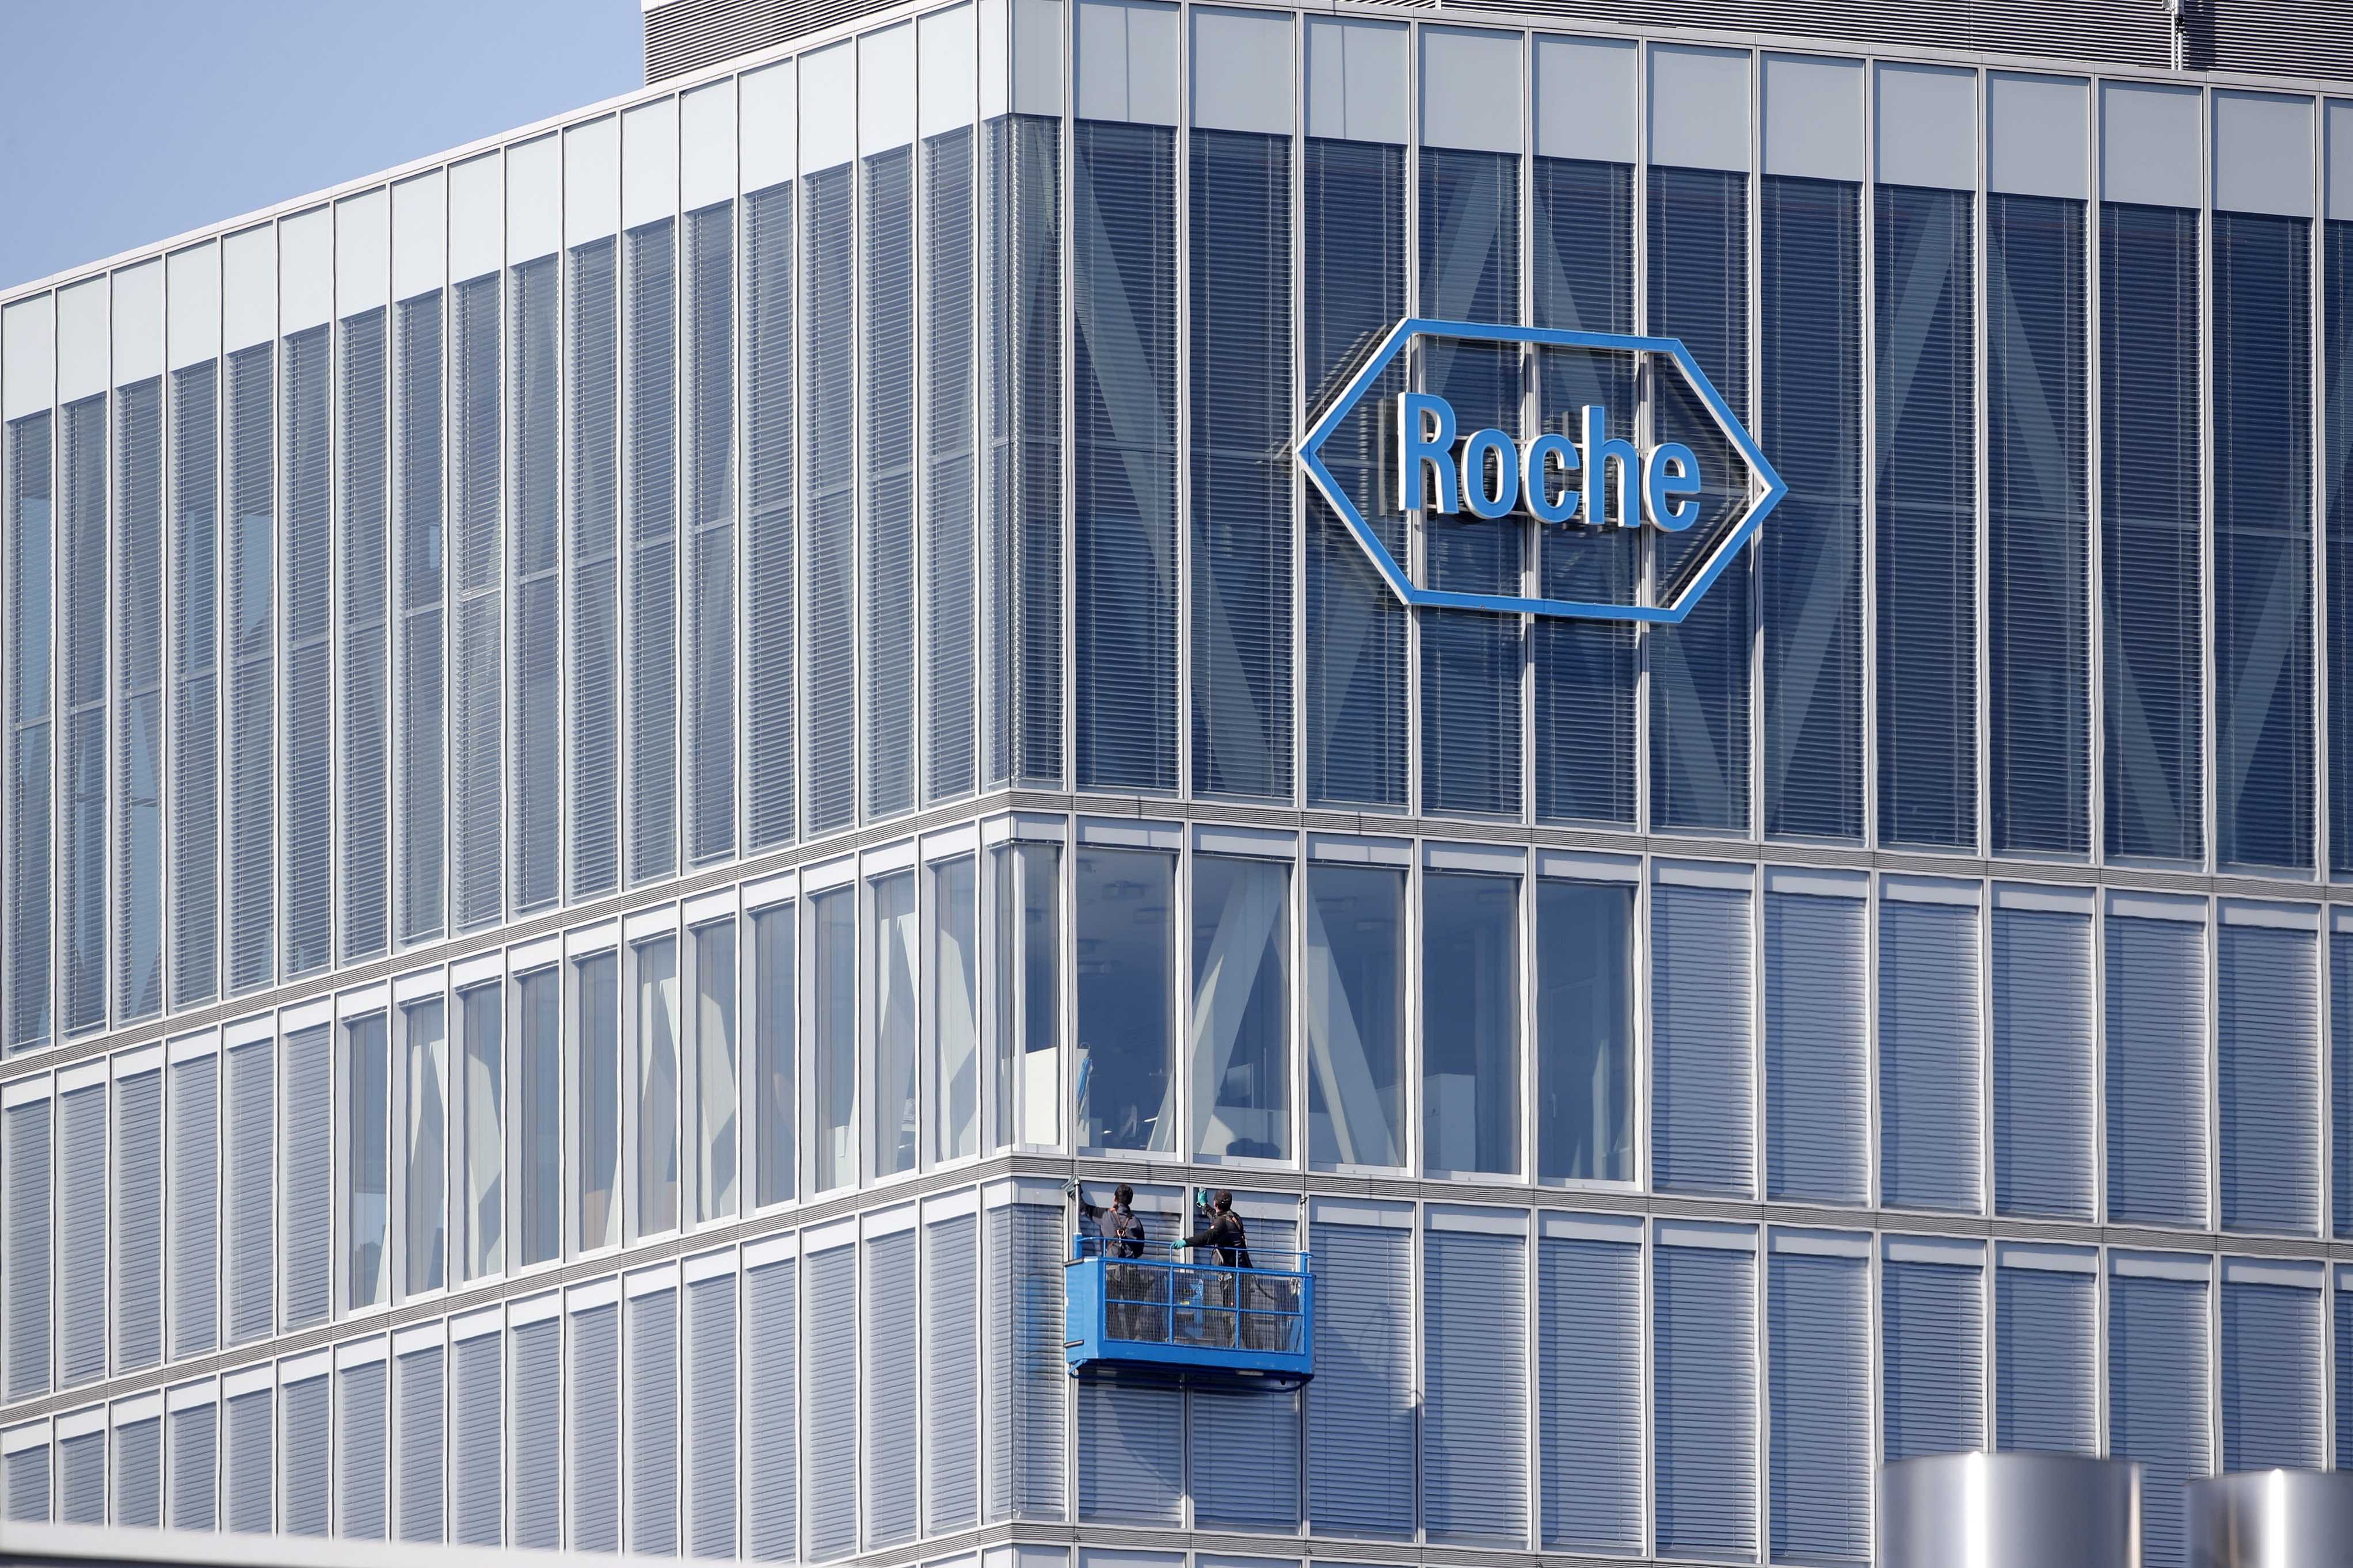 Roche said in a statement that it had joined forces with Gilead for a global phase III clinical trial evaluating the safety and efficacy of using tocilizumab -- sold under the brand names Actemra and RoAcemtra -- combined with remdesivir in hospitalised patients with severe COVID-19 pneumonia. (Reuters photo)